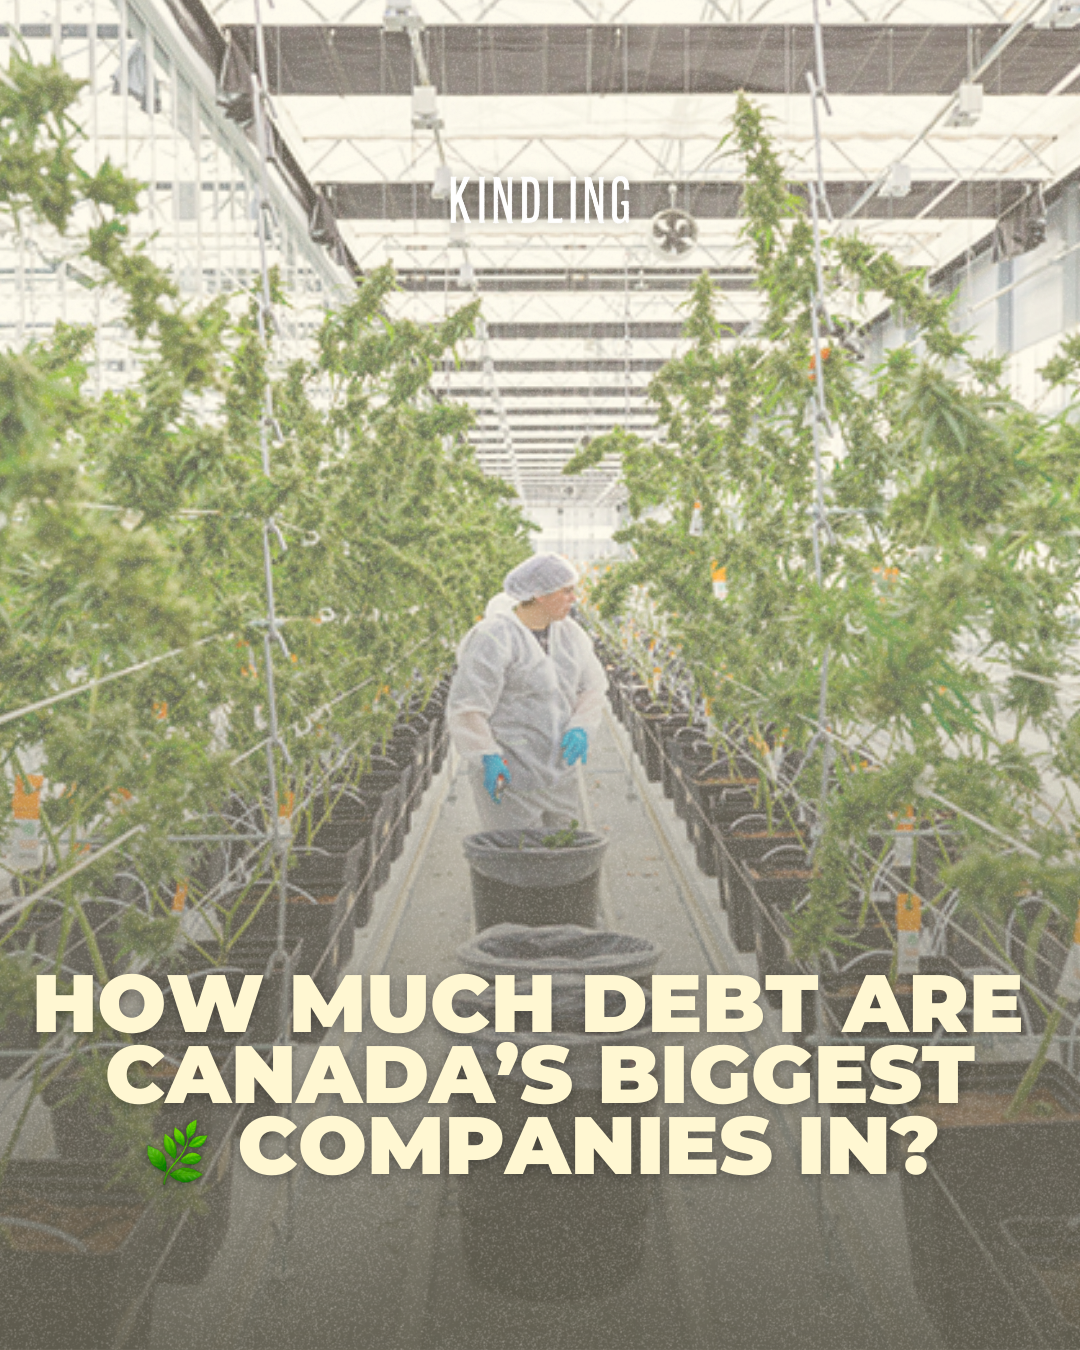 Here's How Much Debt Canada's Biggest Cannabis Companies Are In